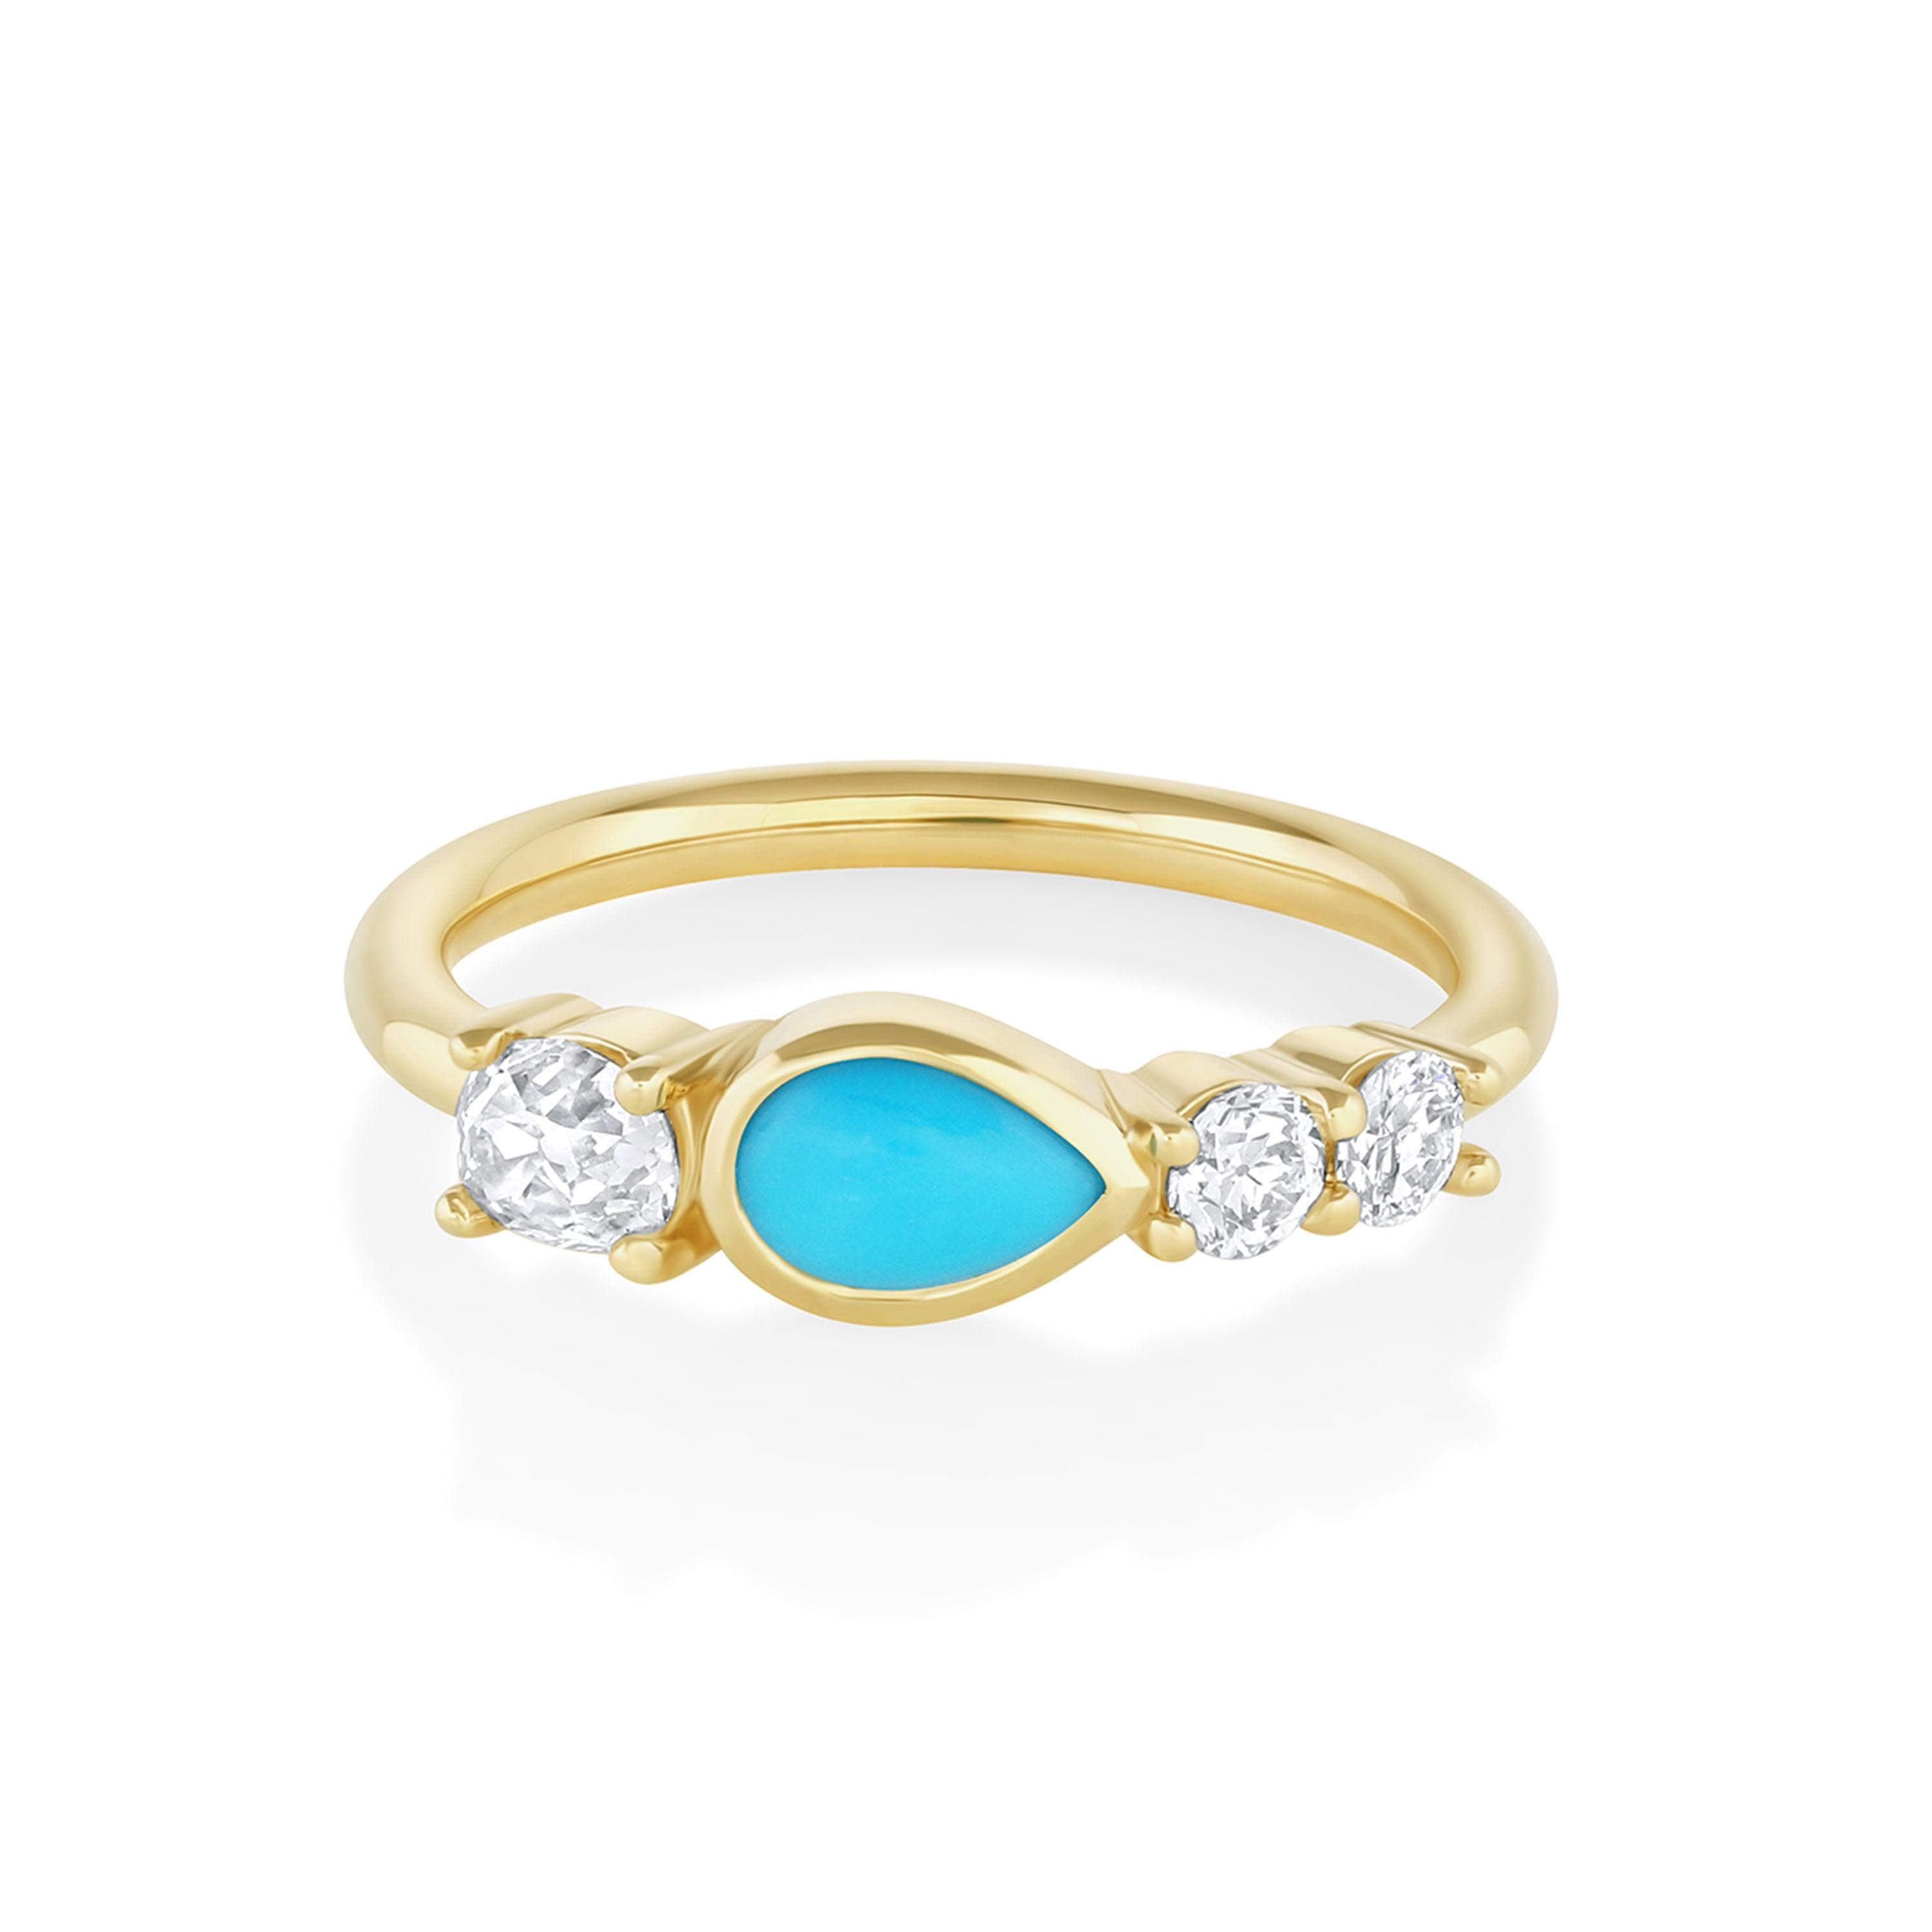 Marrow Fine Jewelry Bezel Set Turquoise Pear And White Diamond Linear Ring